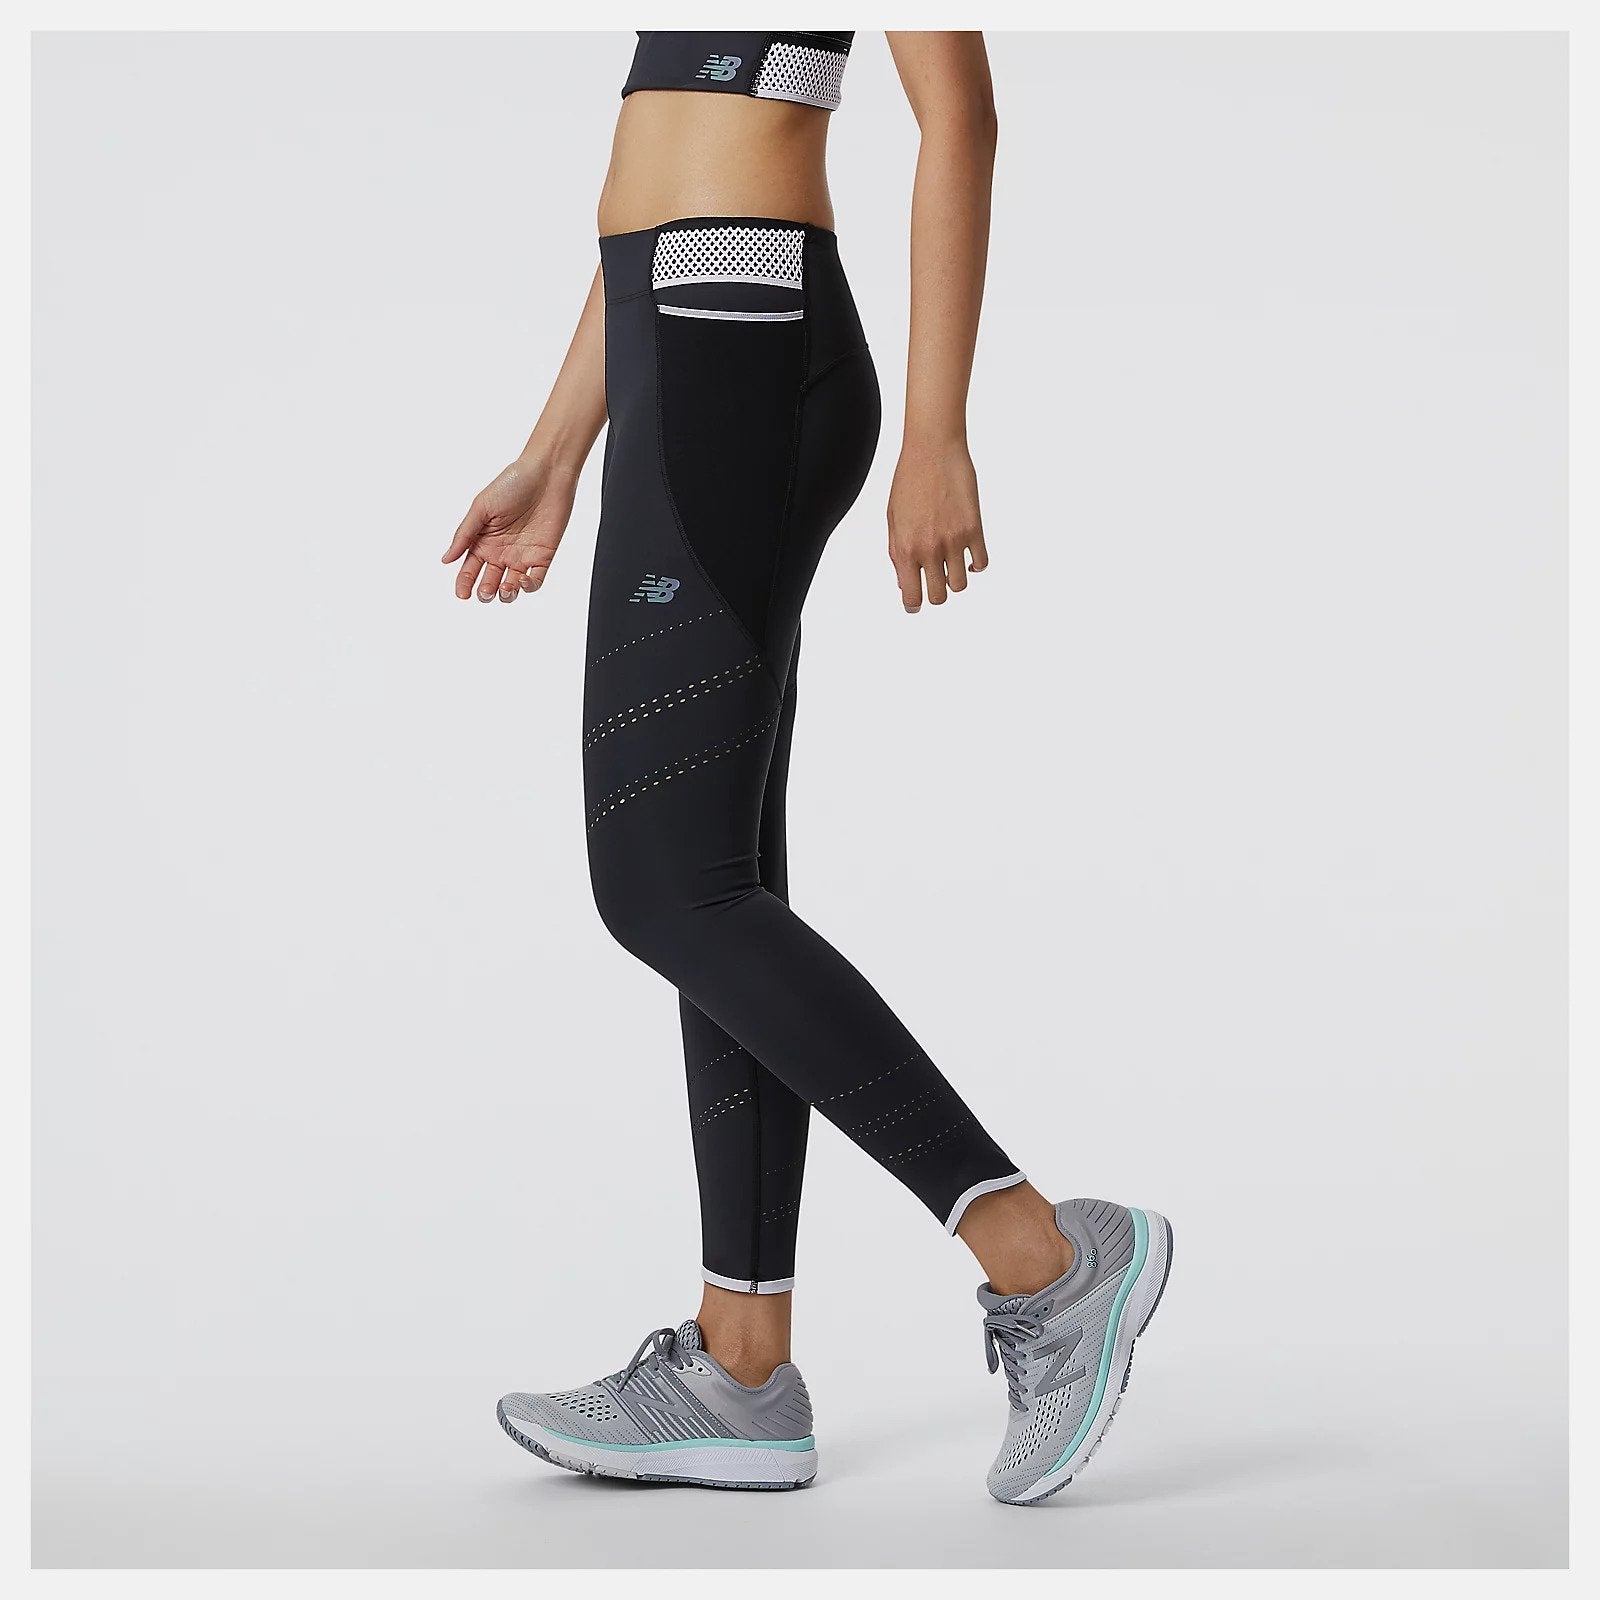 Made for your run or workout, our versatile Q SPEED Shape Shield Tight uses Shape Shield fabric to offer coverage and a lightweight, soft feel so you stay focused on your performance. With NB DRYx to wick away moisture, these women's workout leggings also have mesh panel pockets and perforations for added breathability and a hint of style. Drop-in mesh pockets leave space for the essentials.